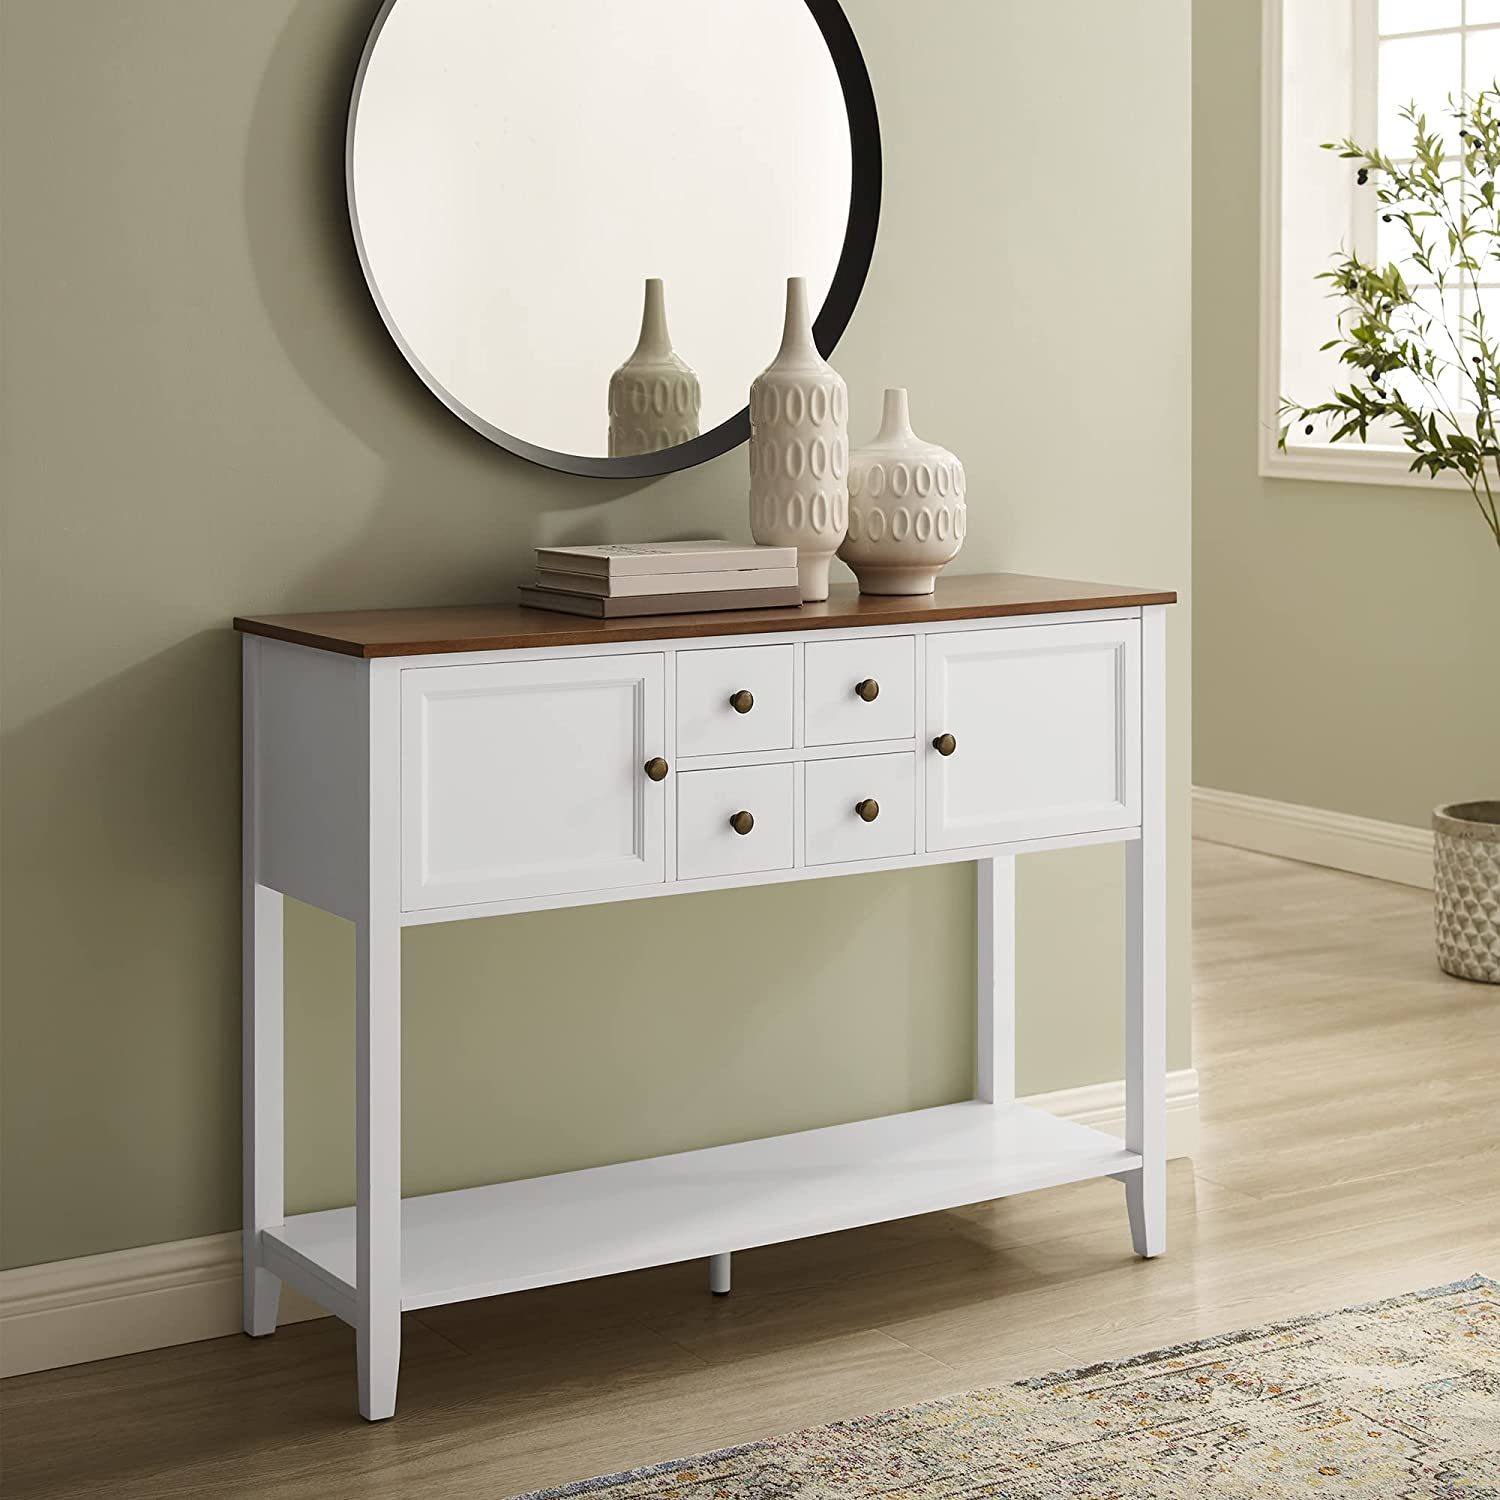 Sideboard Buffet Storage Cabinet with Storage Drawers Storage Cabinets and Large Shelf